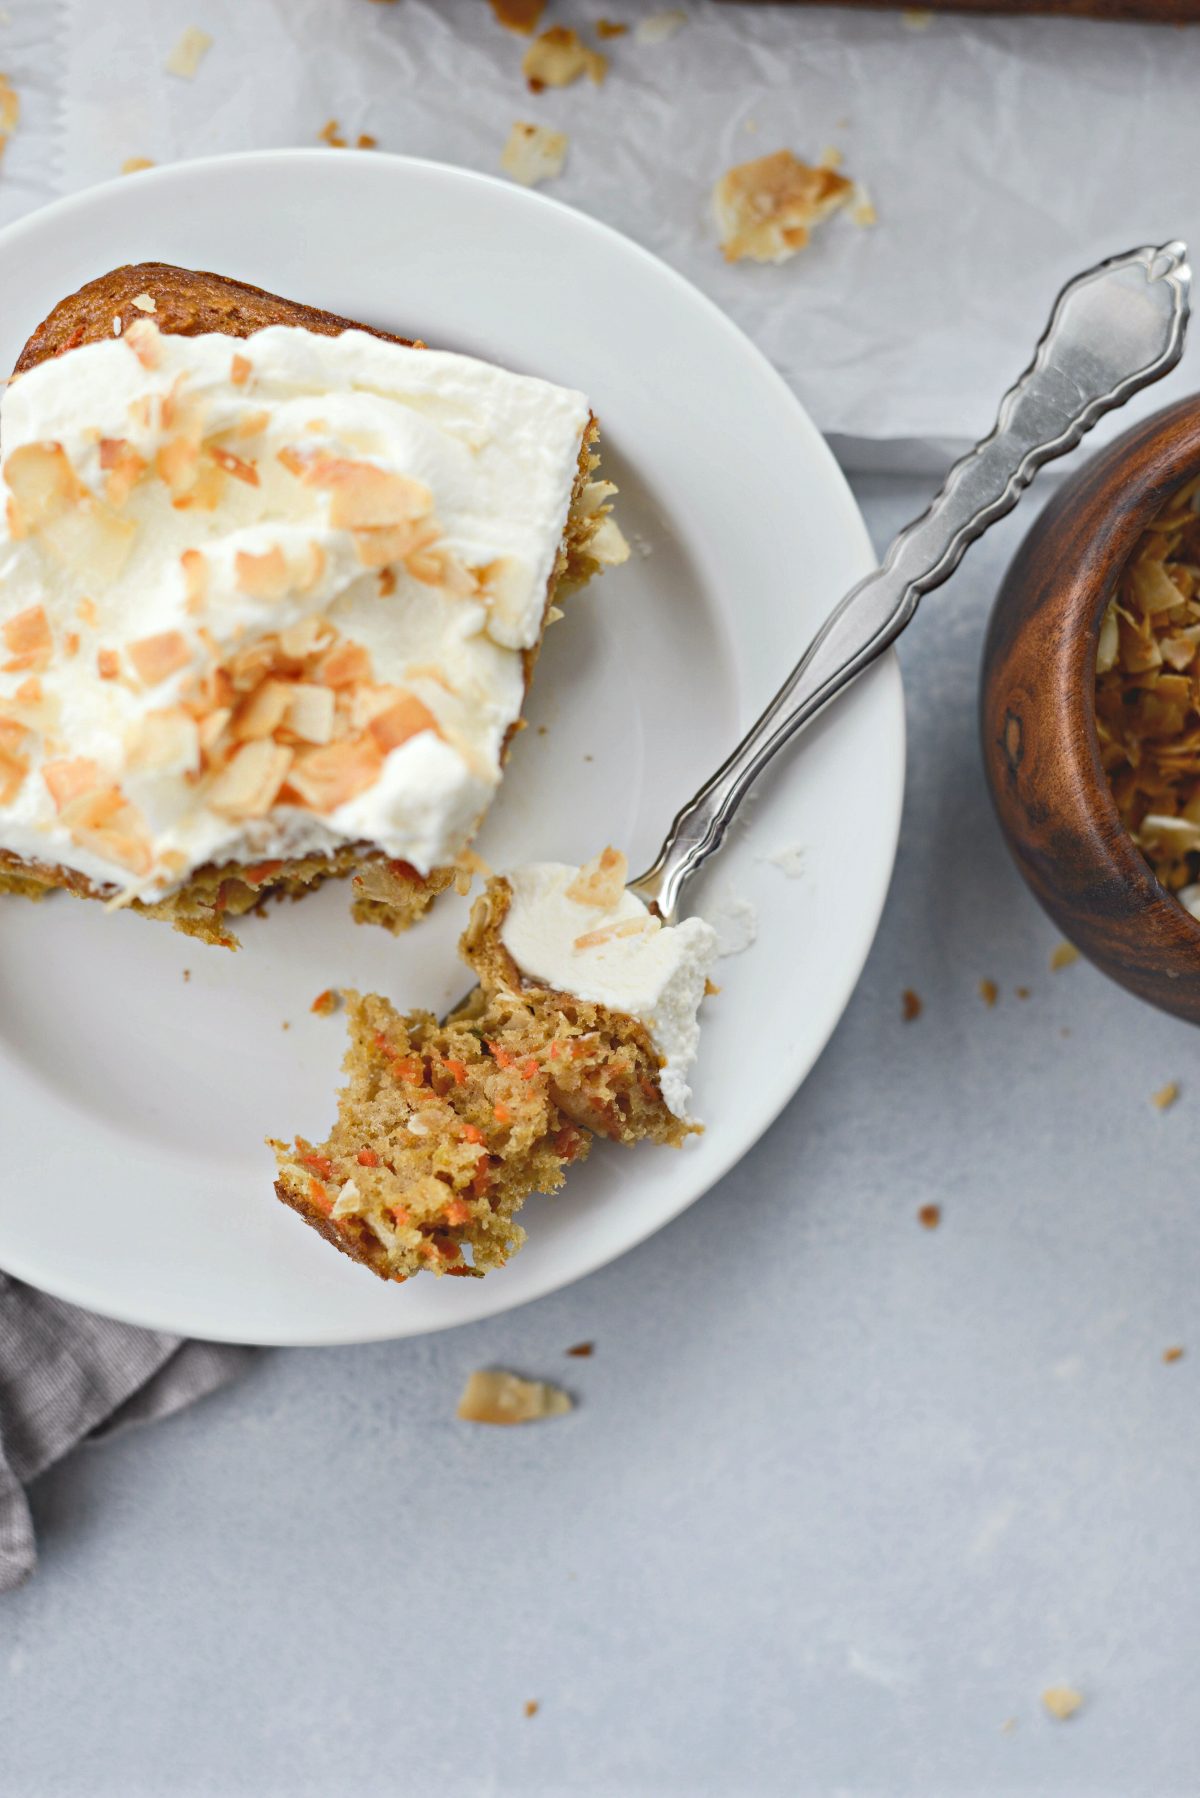 bite of Carrot Cake with Mascarpone Frosting l SimplyScratch.com #coconut #carrot #cake #chai #easter #carrotcake #mascarpone #frosting